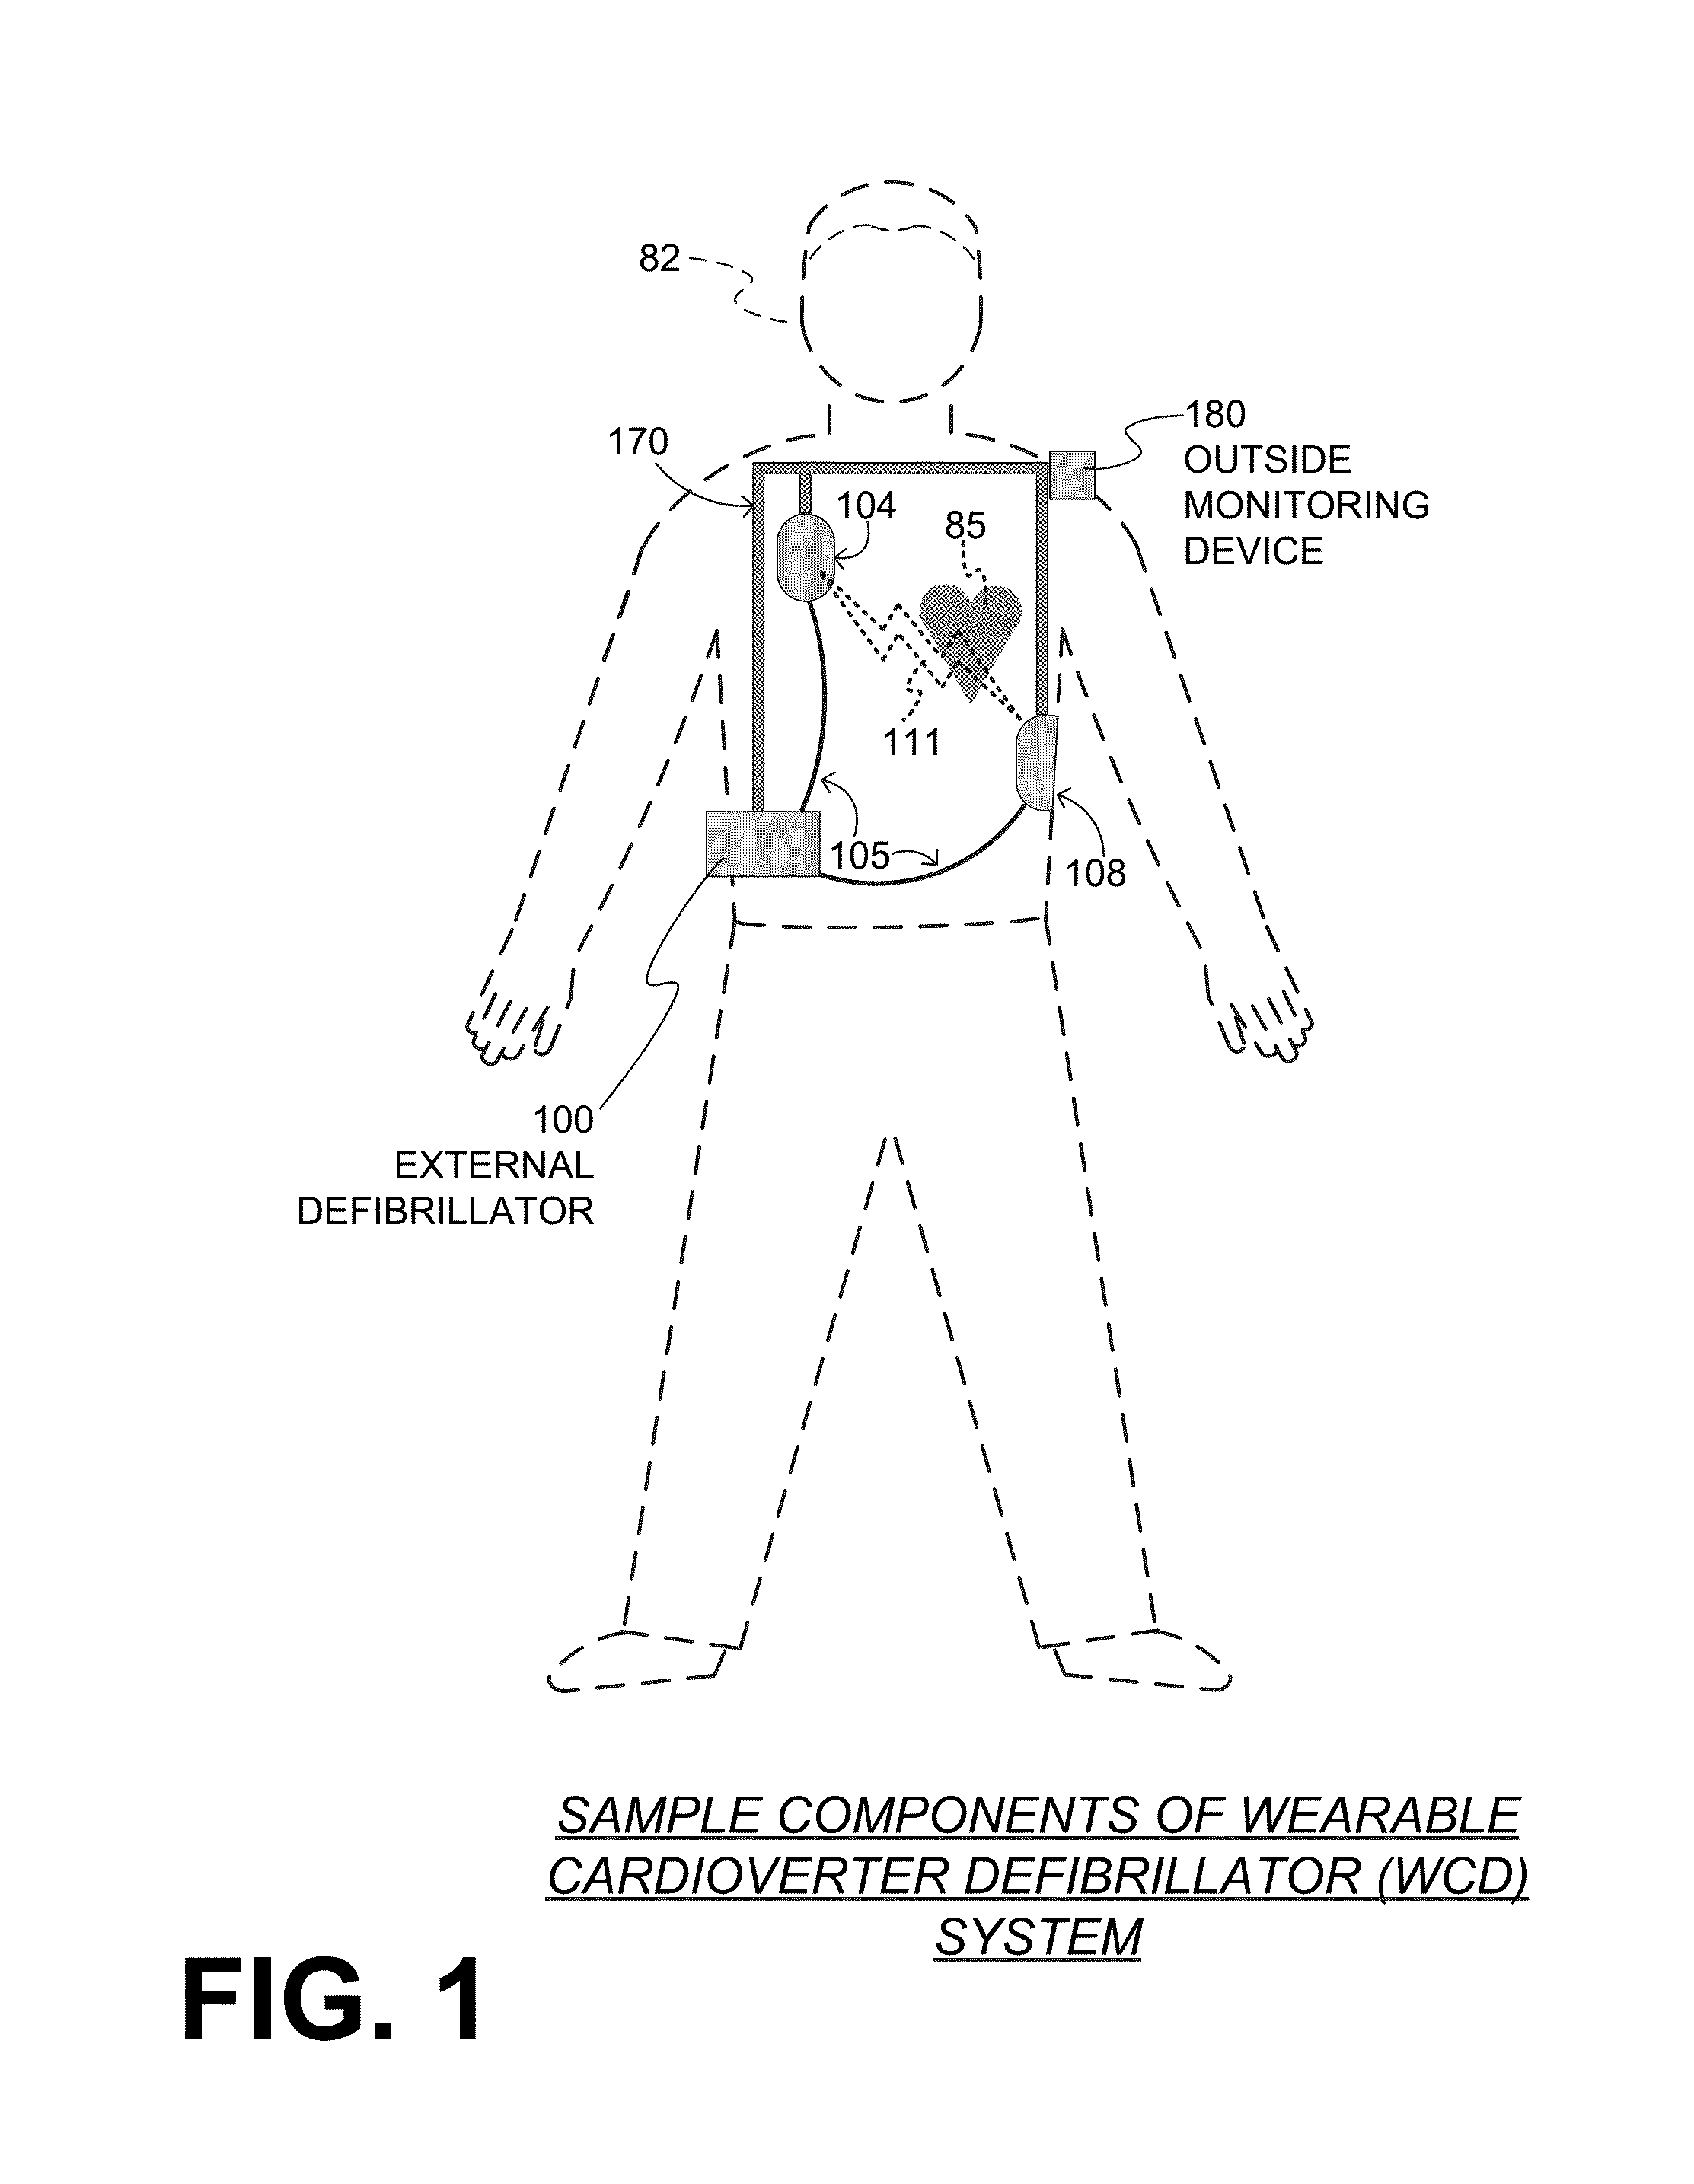 Wearable cardioverter defibrillator (WCD) system informing patient that it is validating just-detected cardiac arrhythmia